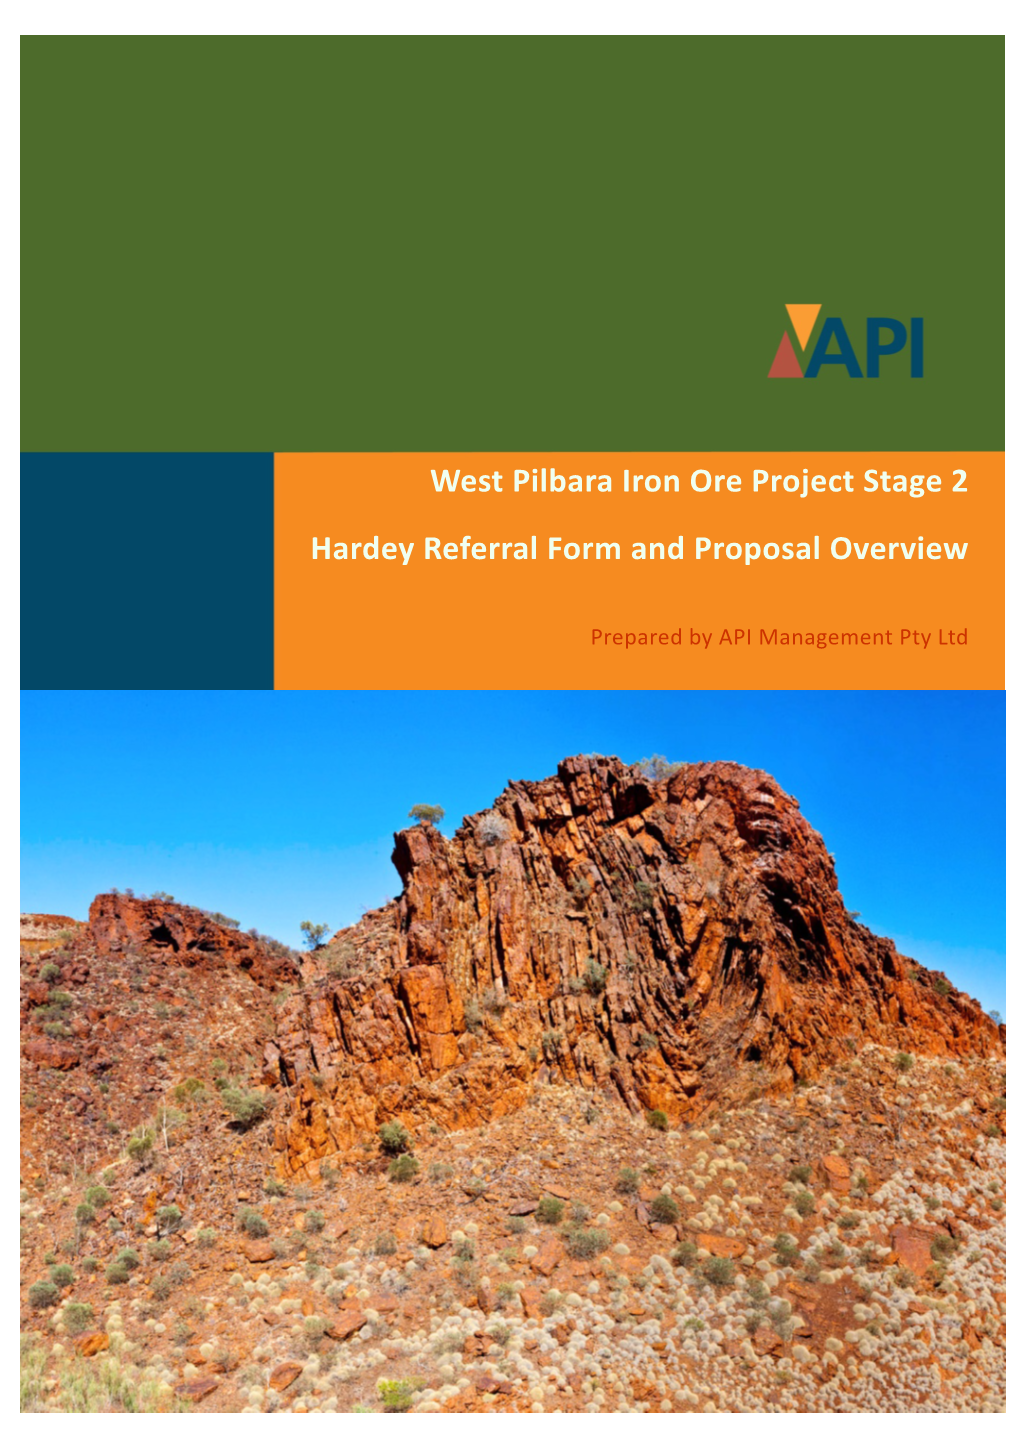 West Pilbara Iron Ore Project Stage 2 Hardey Referral Form and Proposal Overview